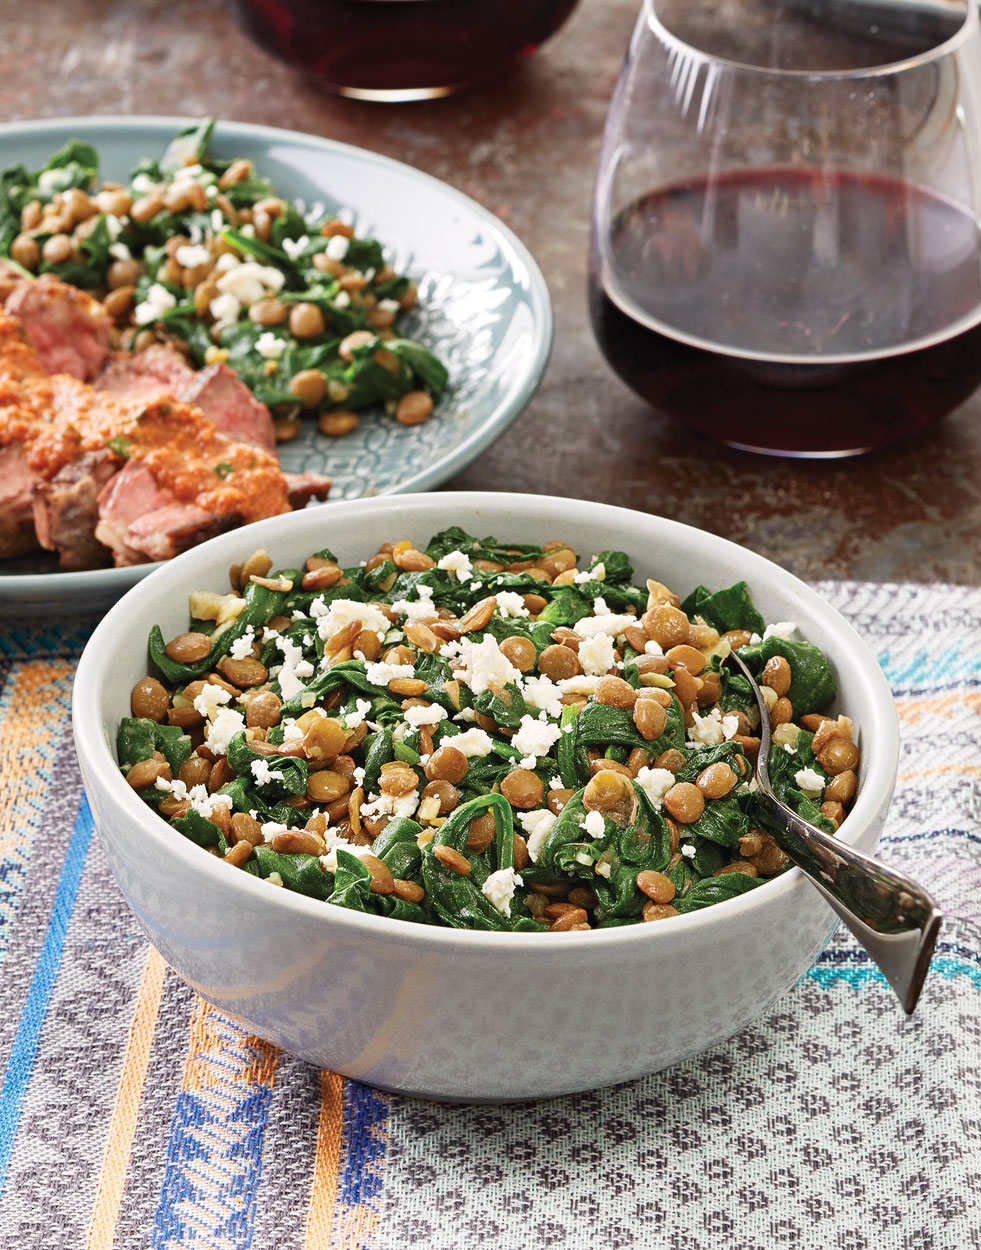 Garlicky Spinach & Lentils with Feta Cheese